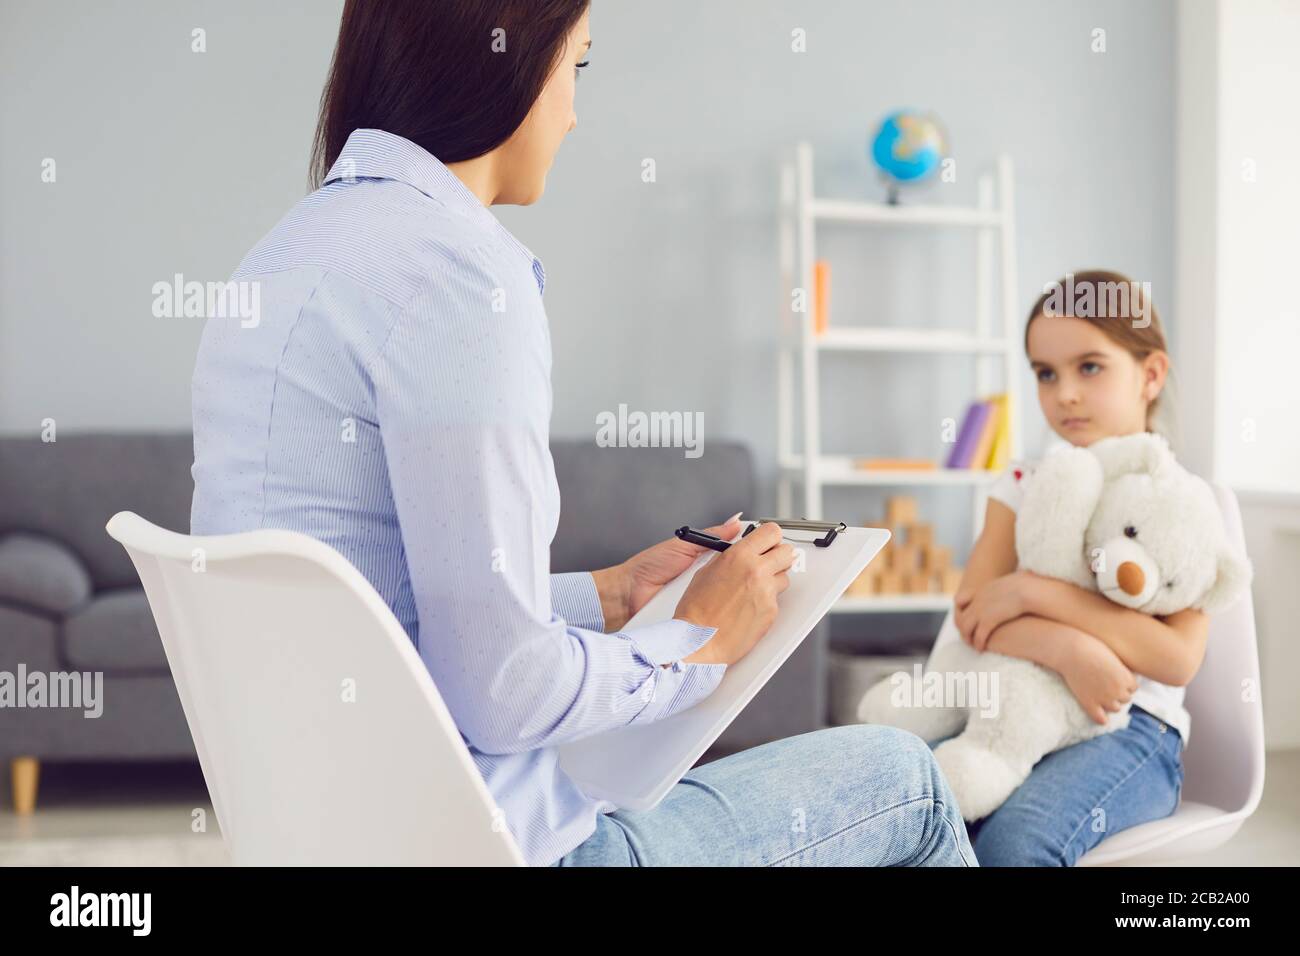 Young Psychologist is talking with a child in the room. Stock Photo